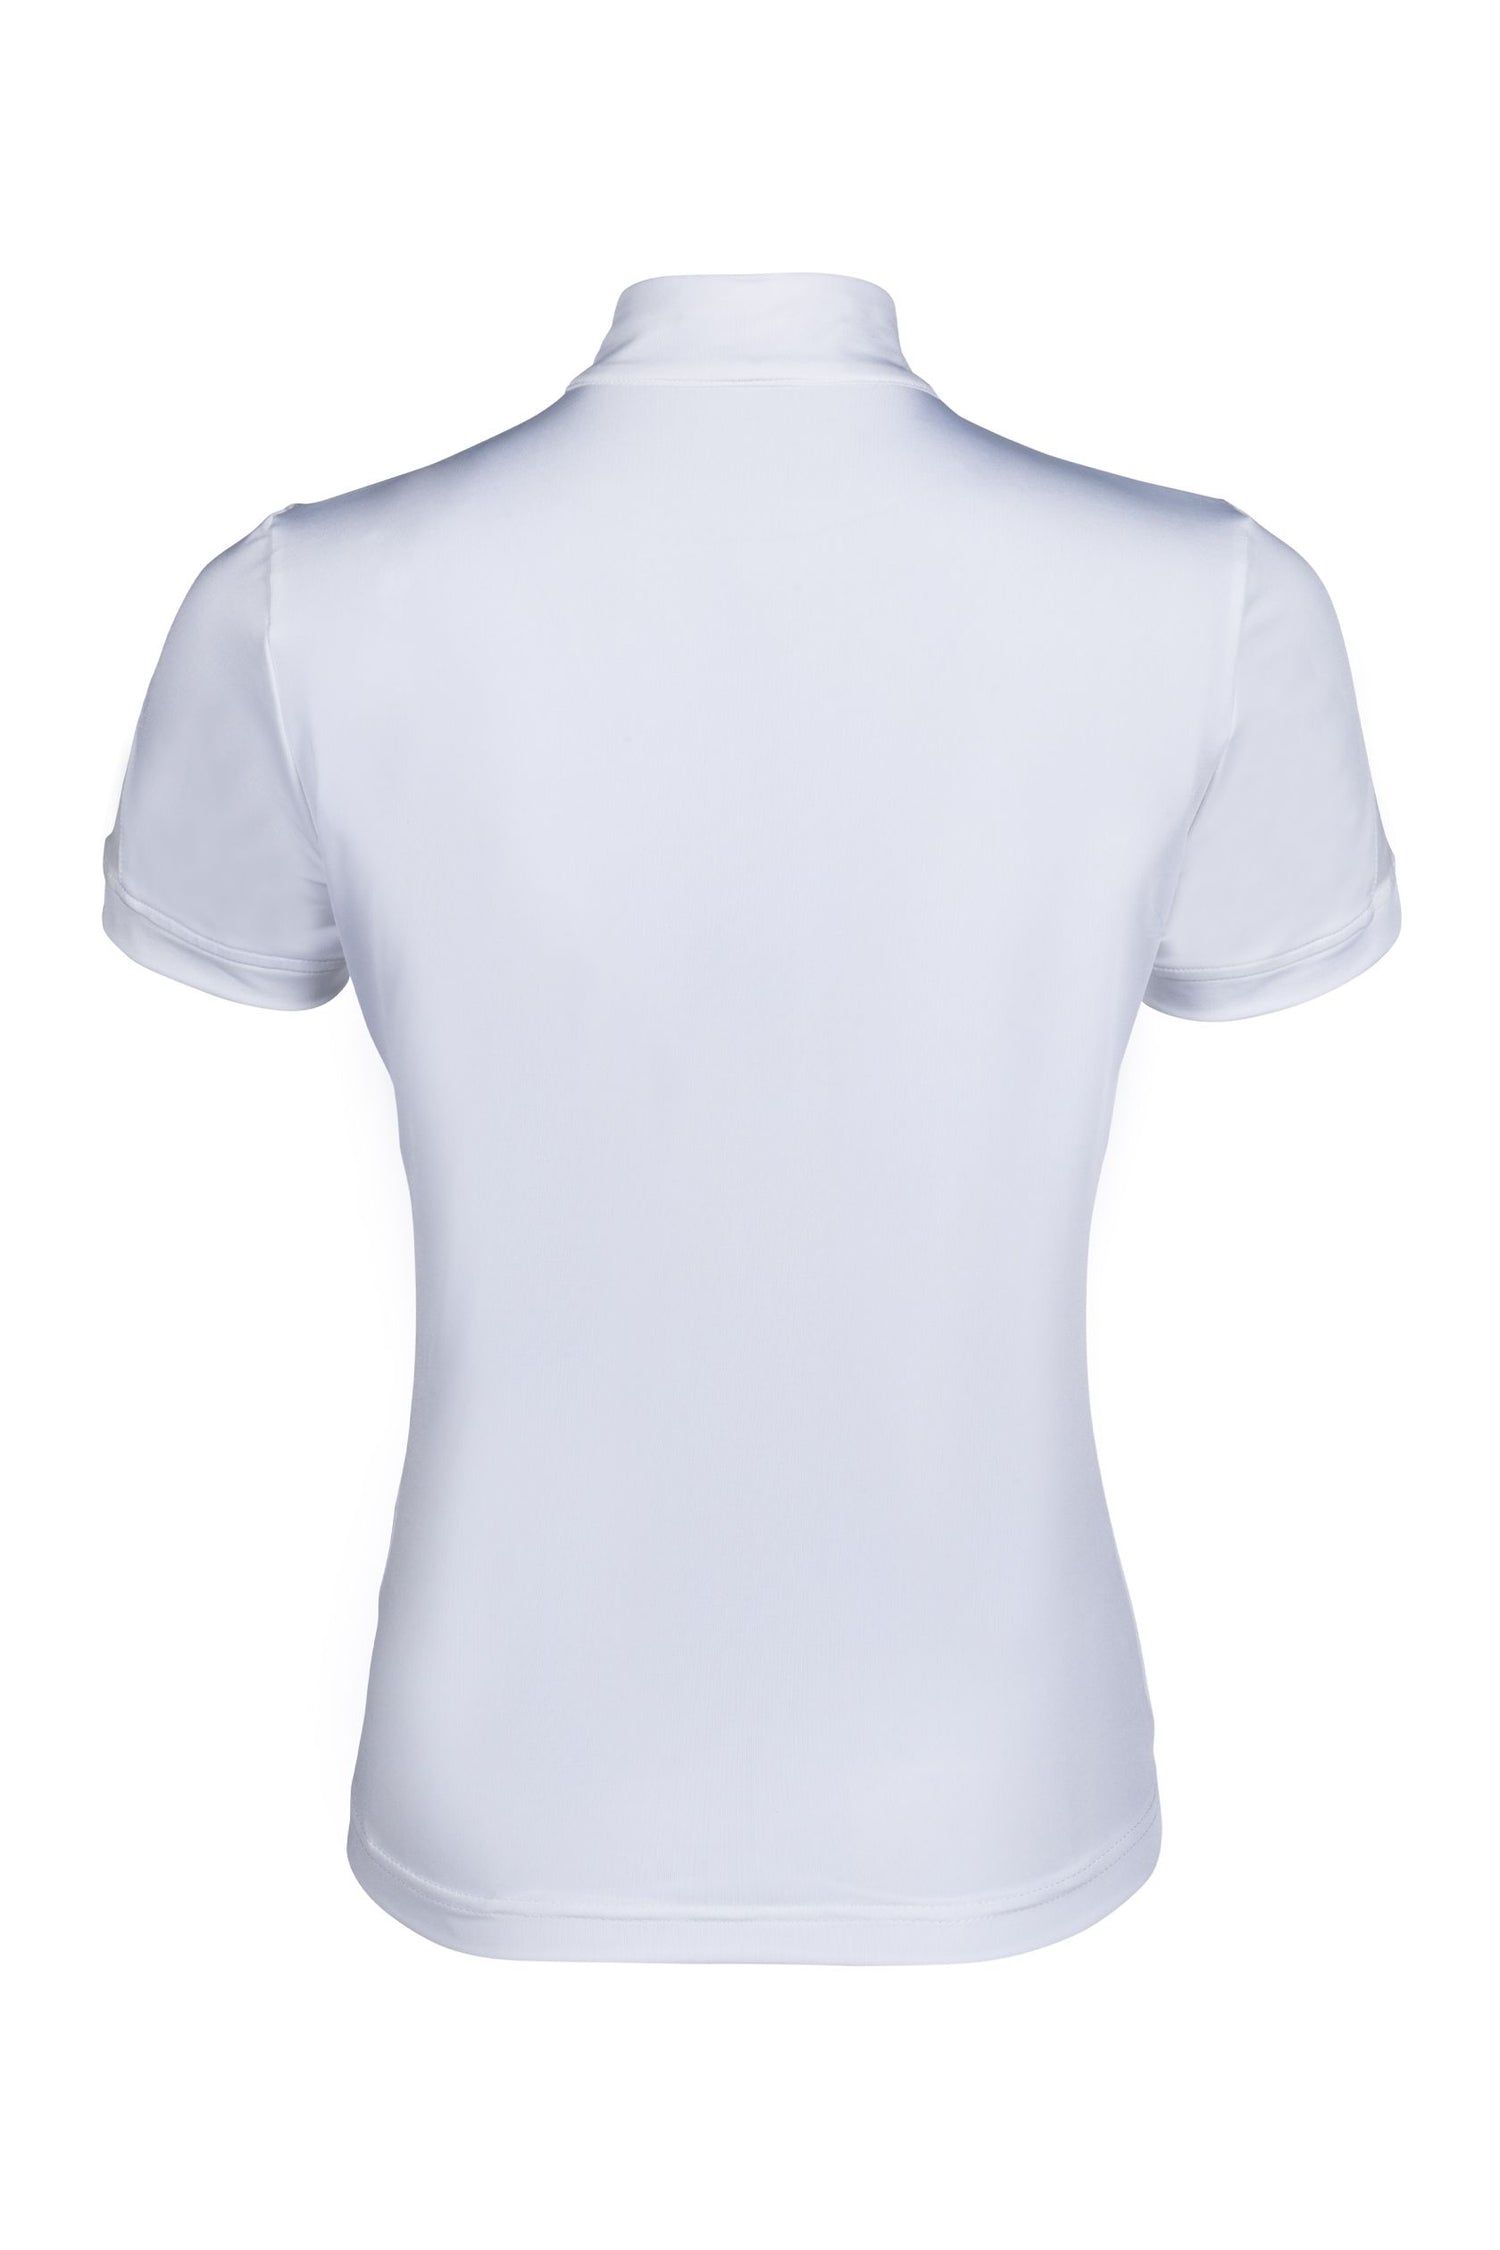 Ladies white competition shirt